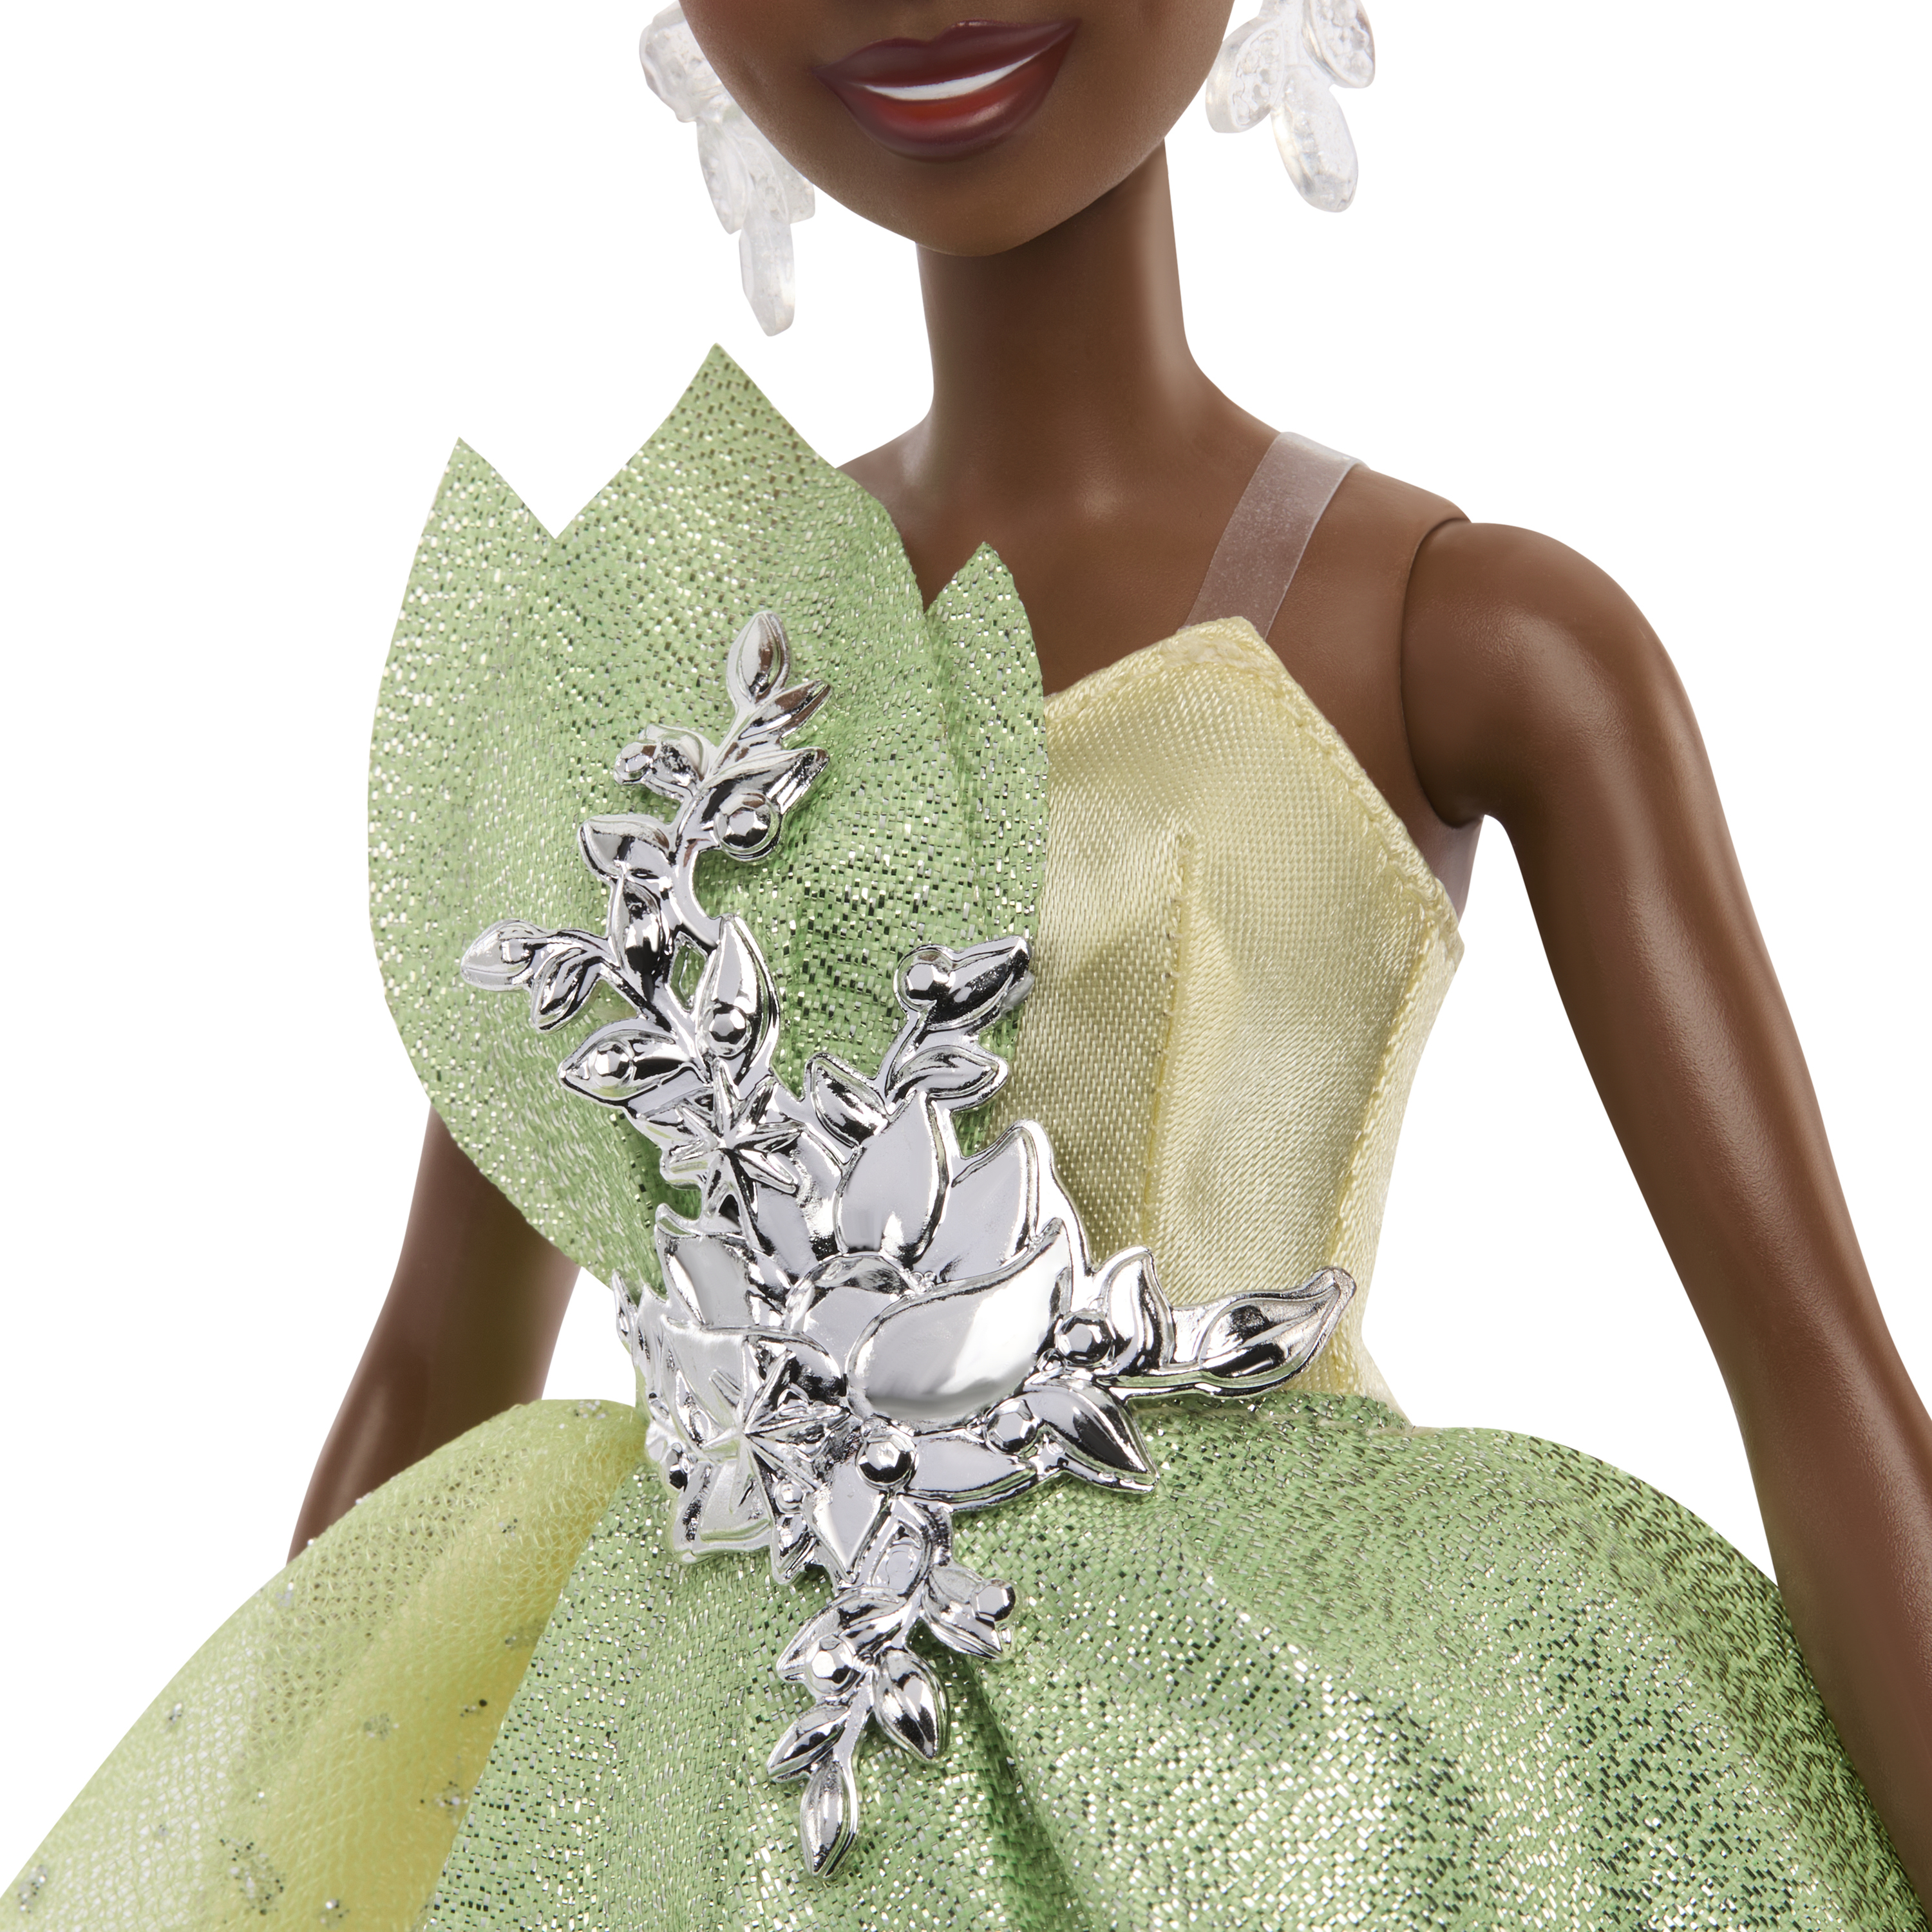 Disney Toys, Disney100 Collector Tiana Doll, Gifts for Kids and Collectors - image 3 of 6